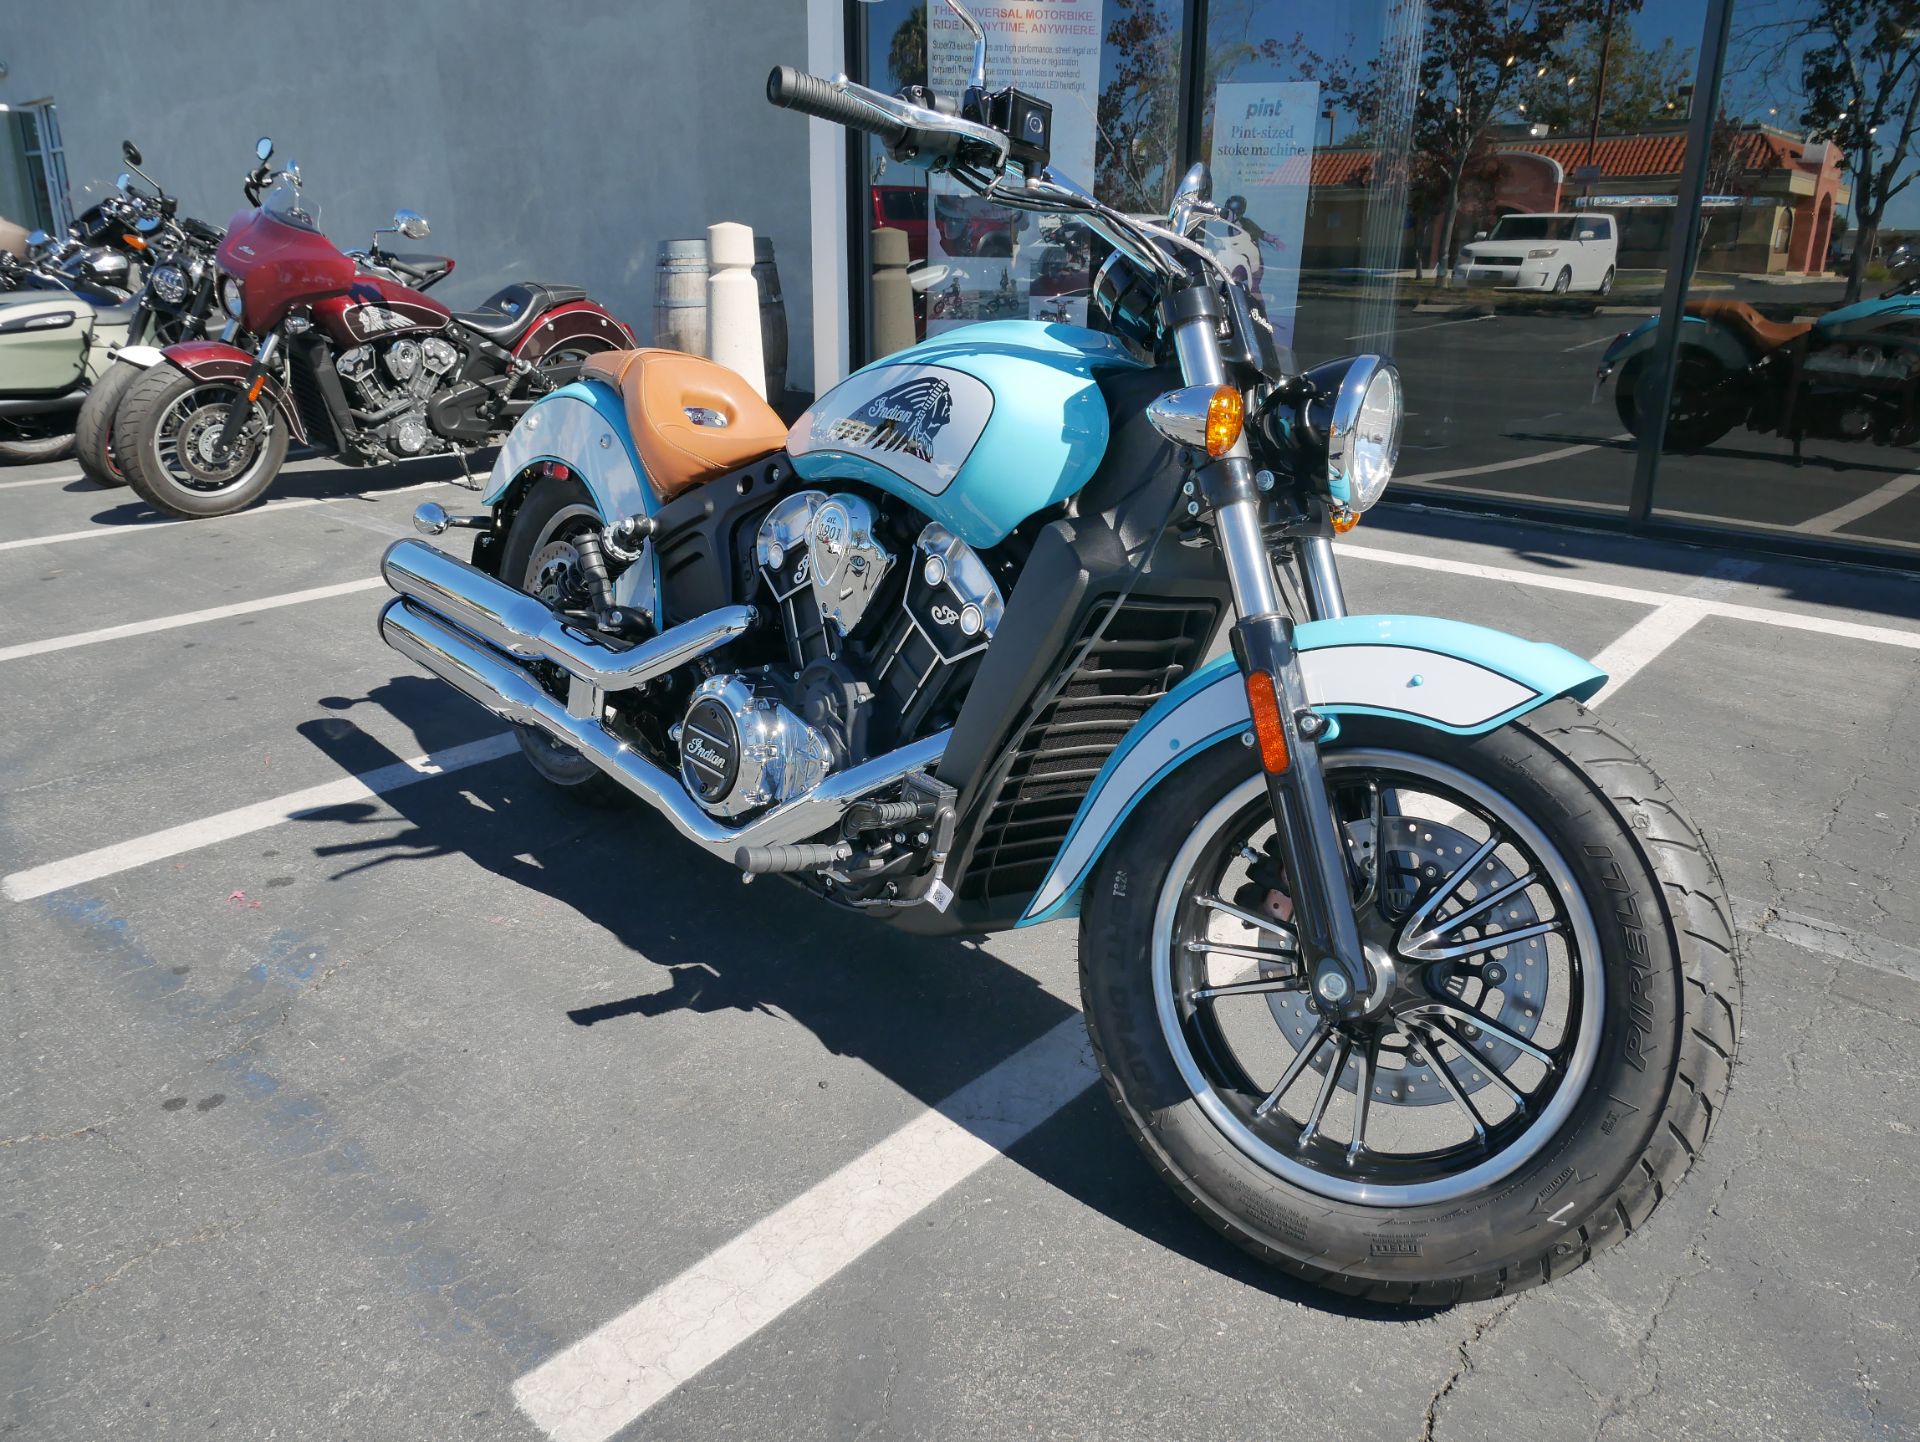 2021 Indian Scout® ABS Icon in San Diego, California - Photo 2